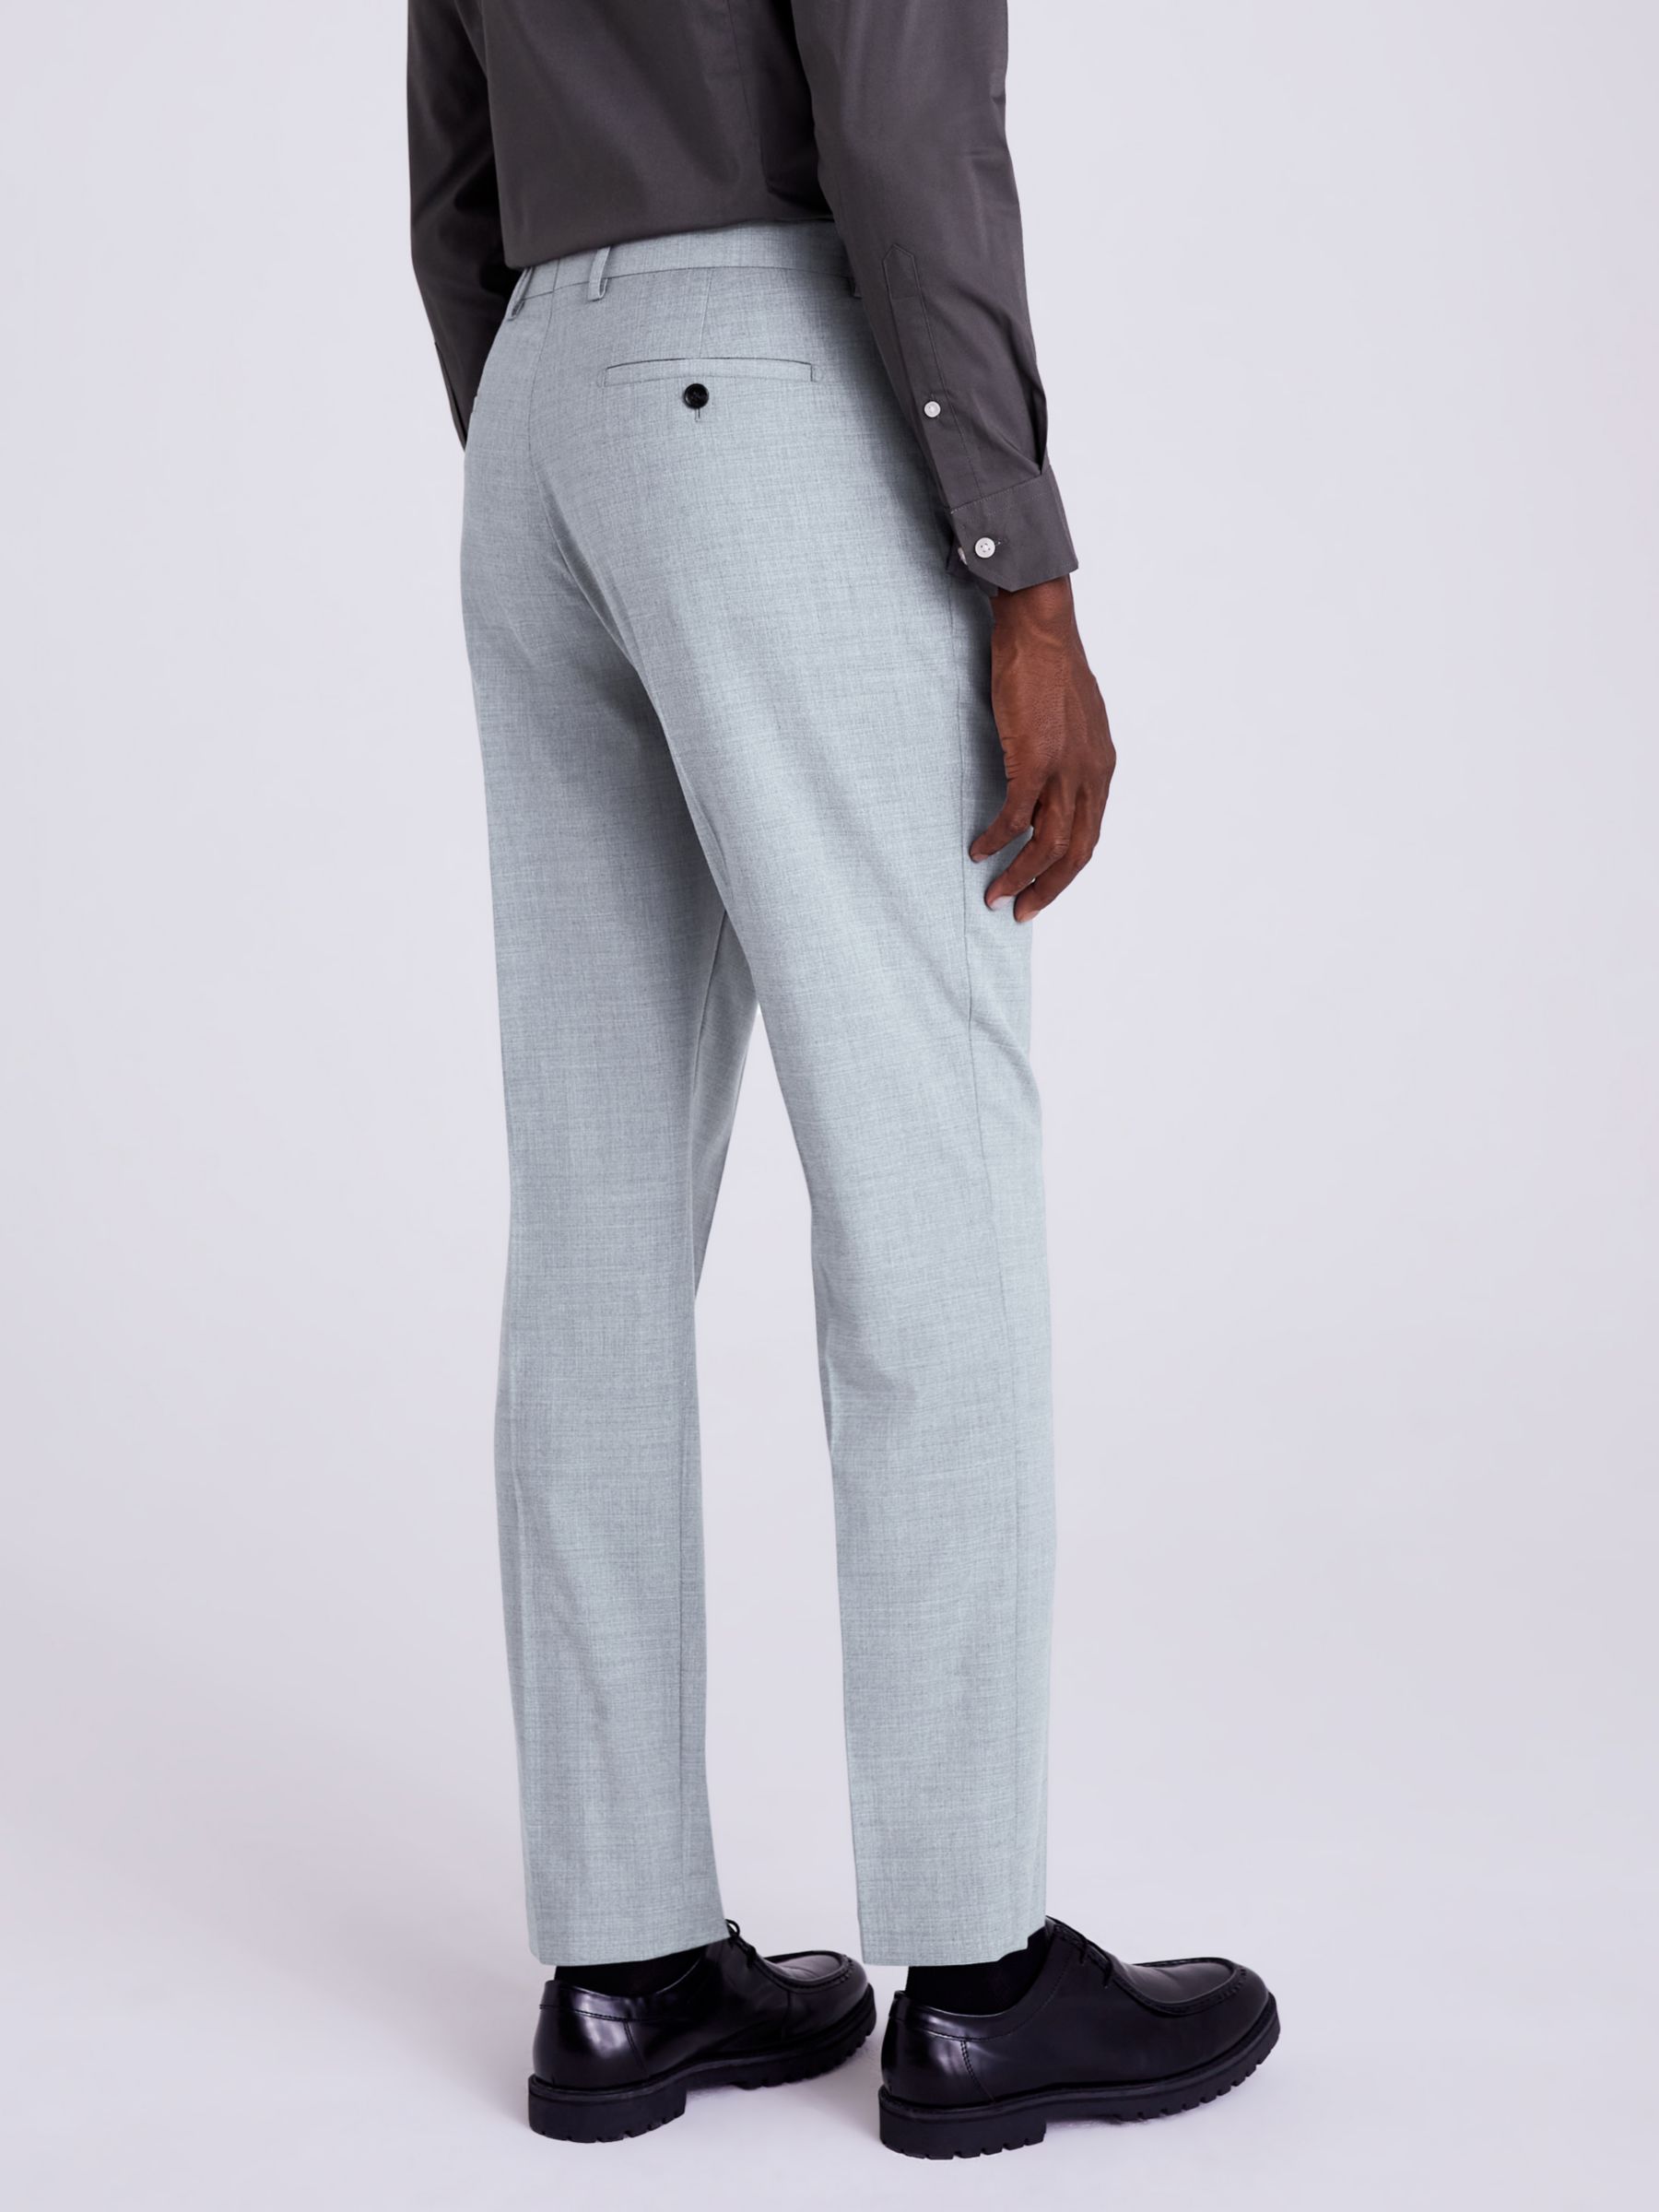 Moss Tailored Stretch Trousers, Grey at John Lewis & Partners